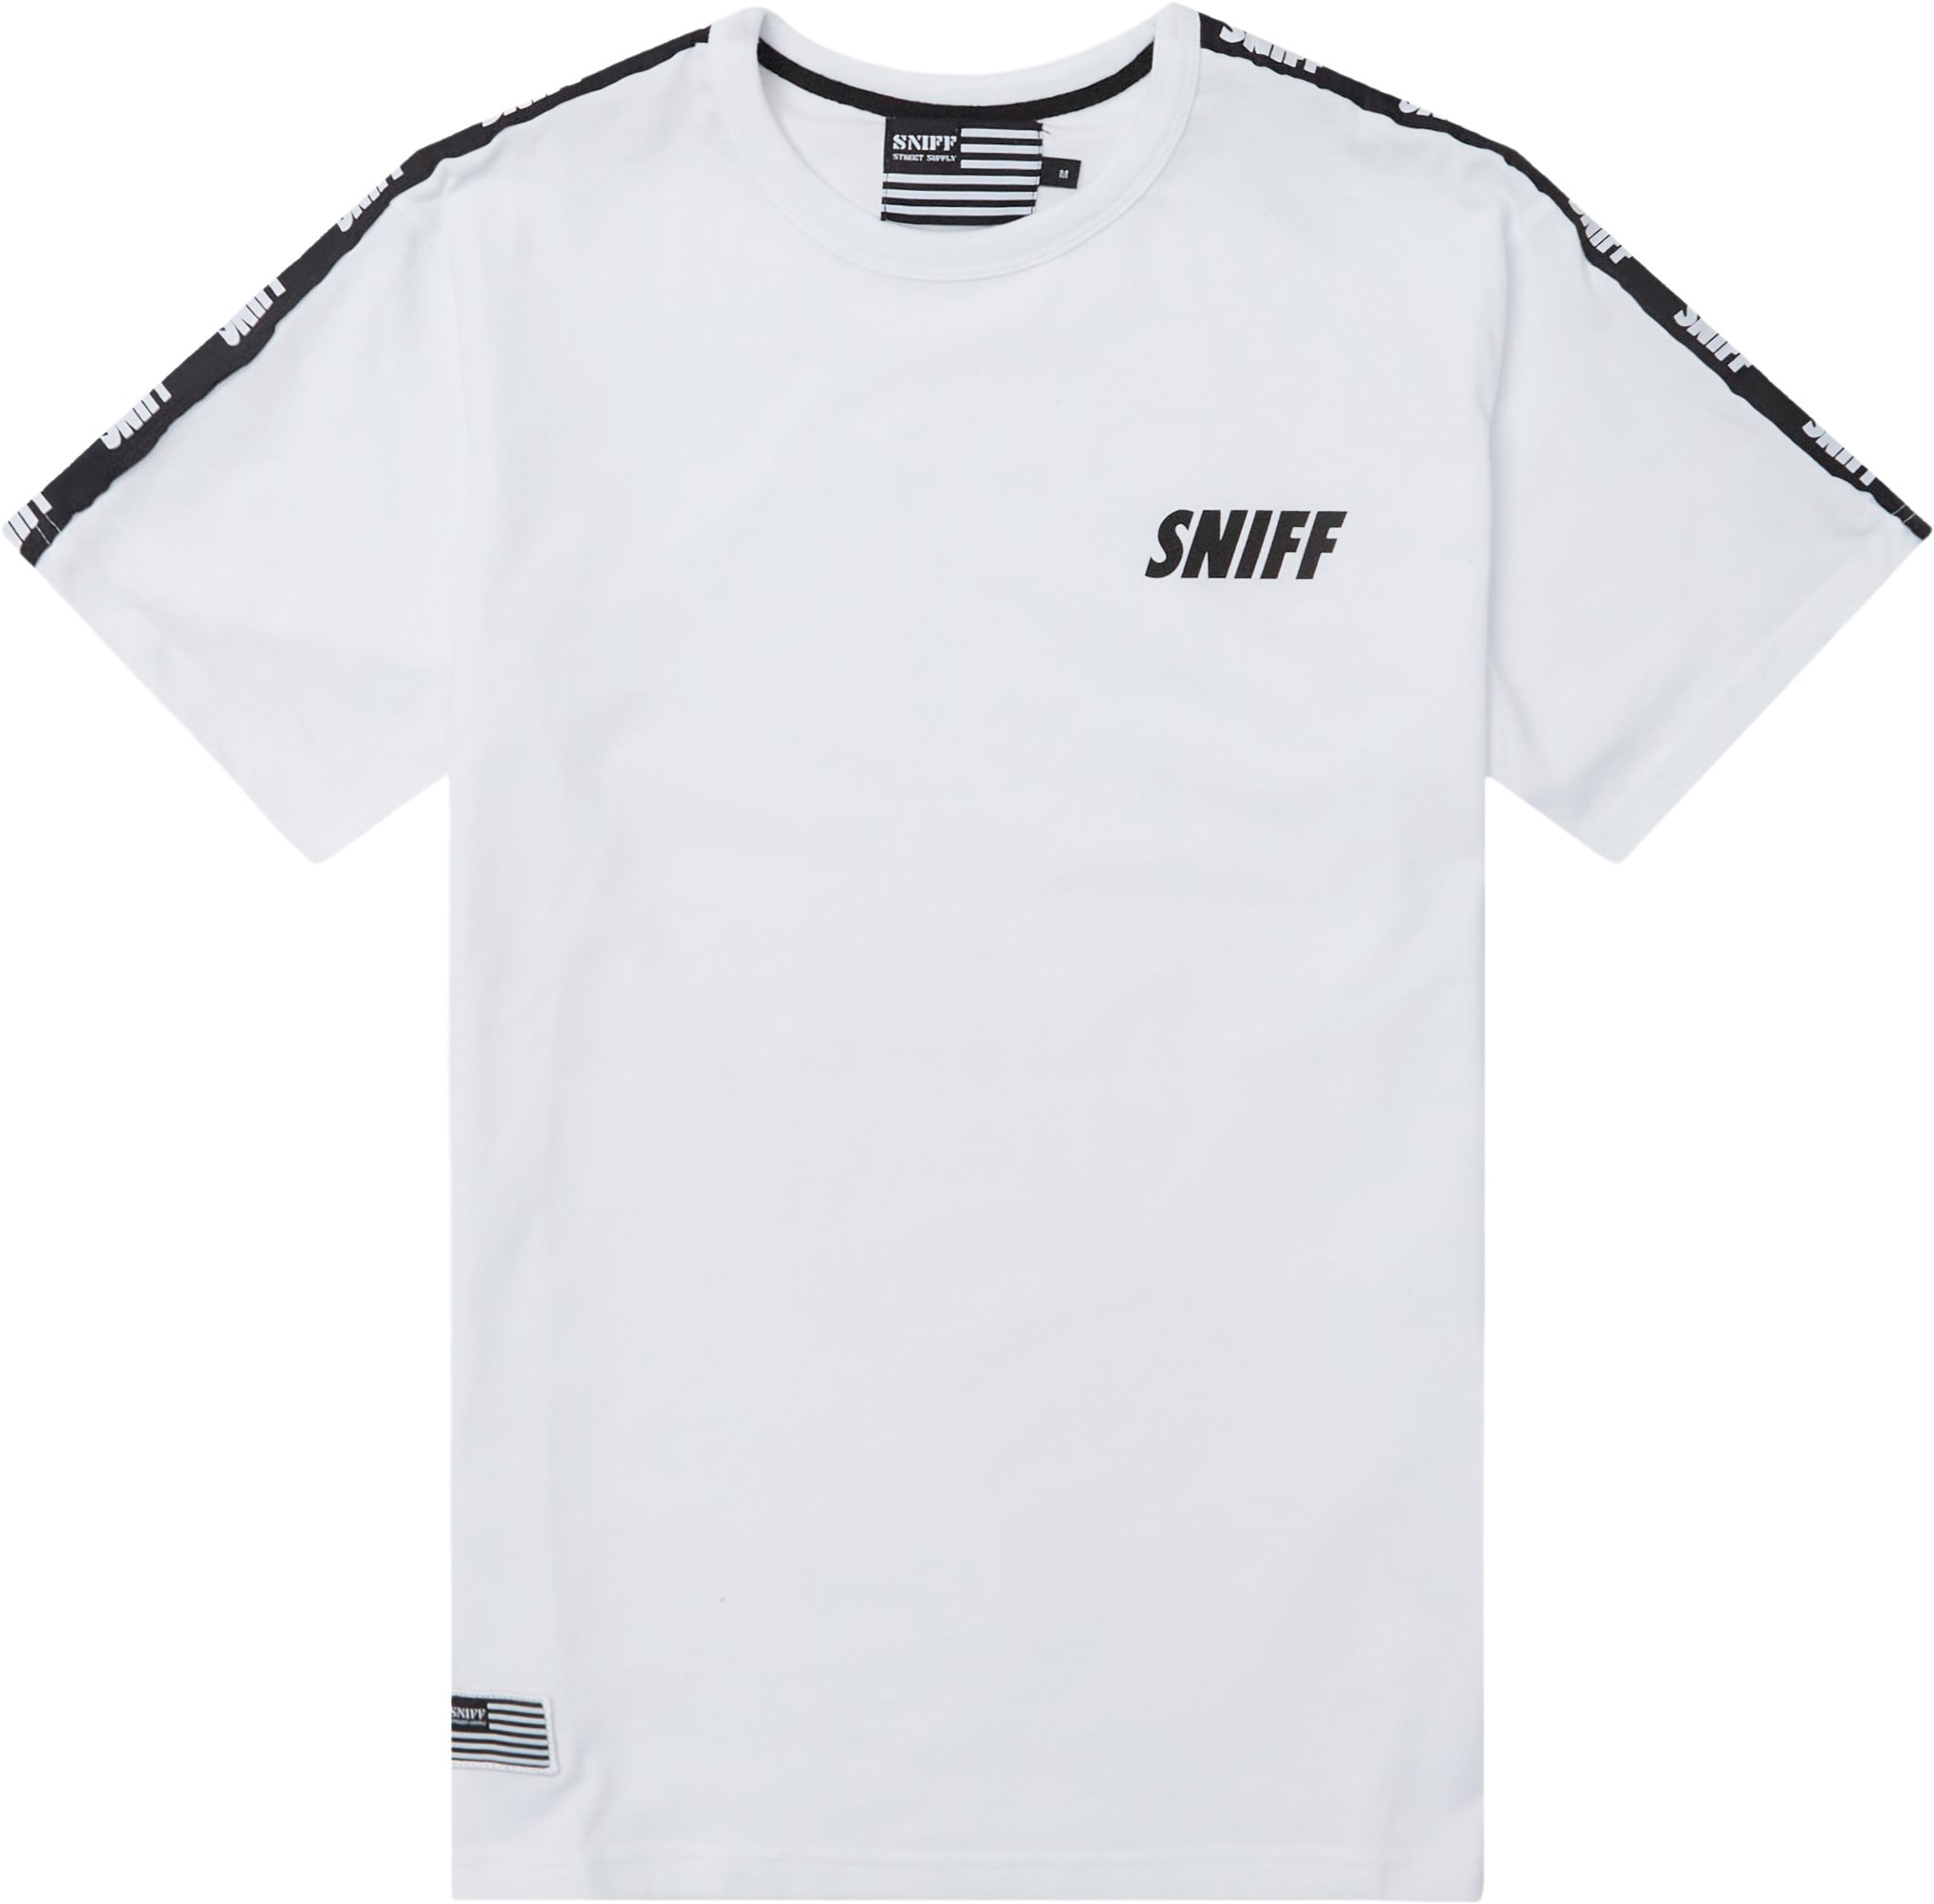 Pointe Tee - T-shirts - Regular fit - White